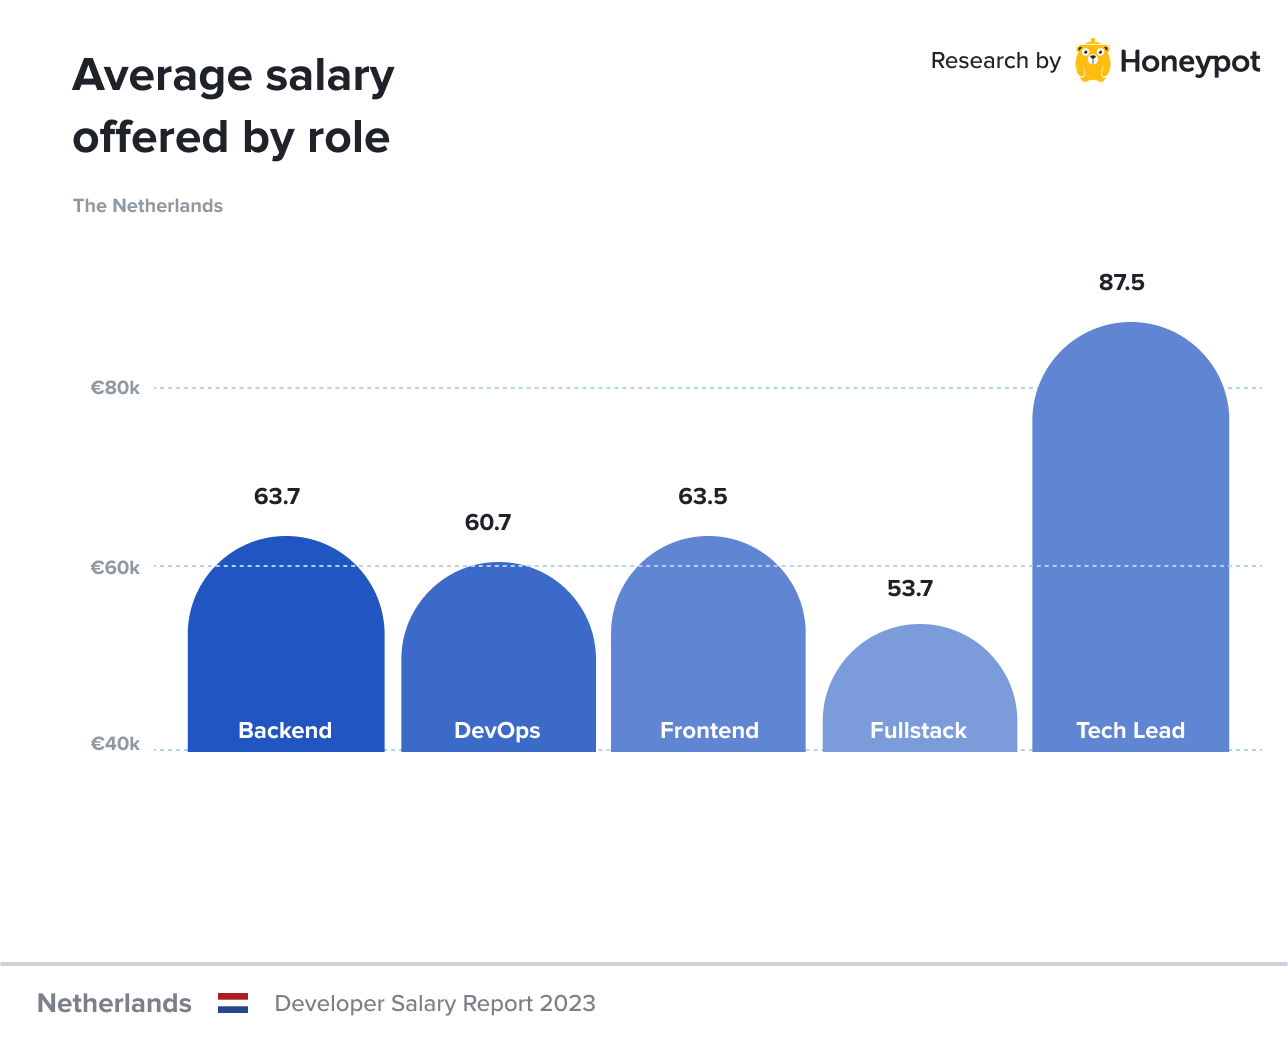 Netherlands – Average offered salary by role